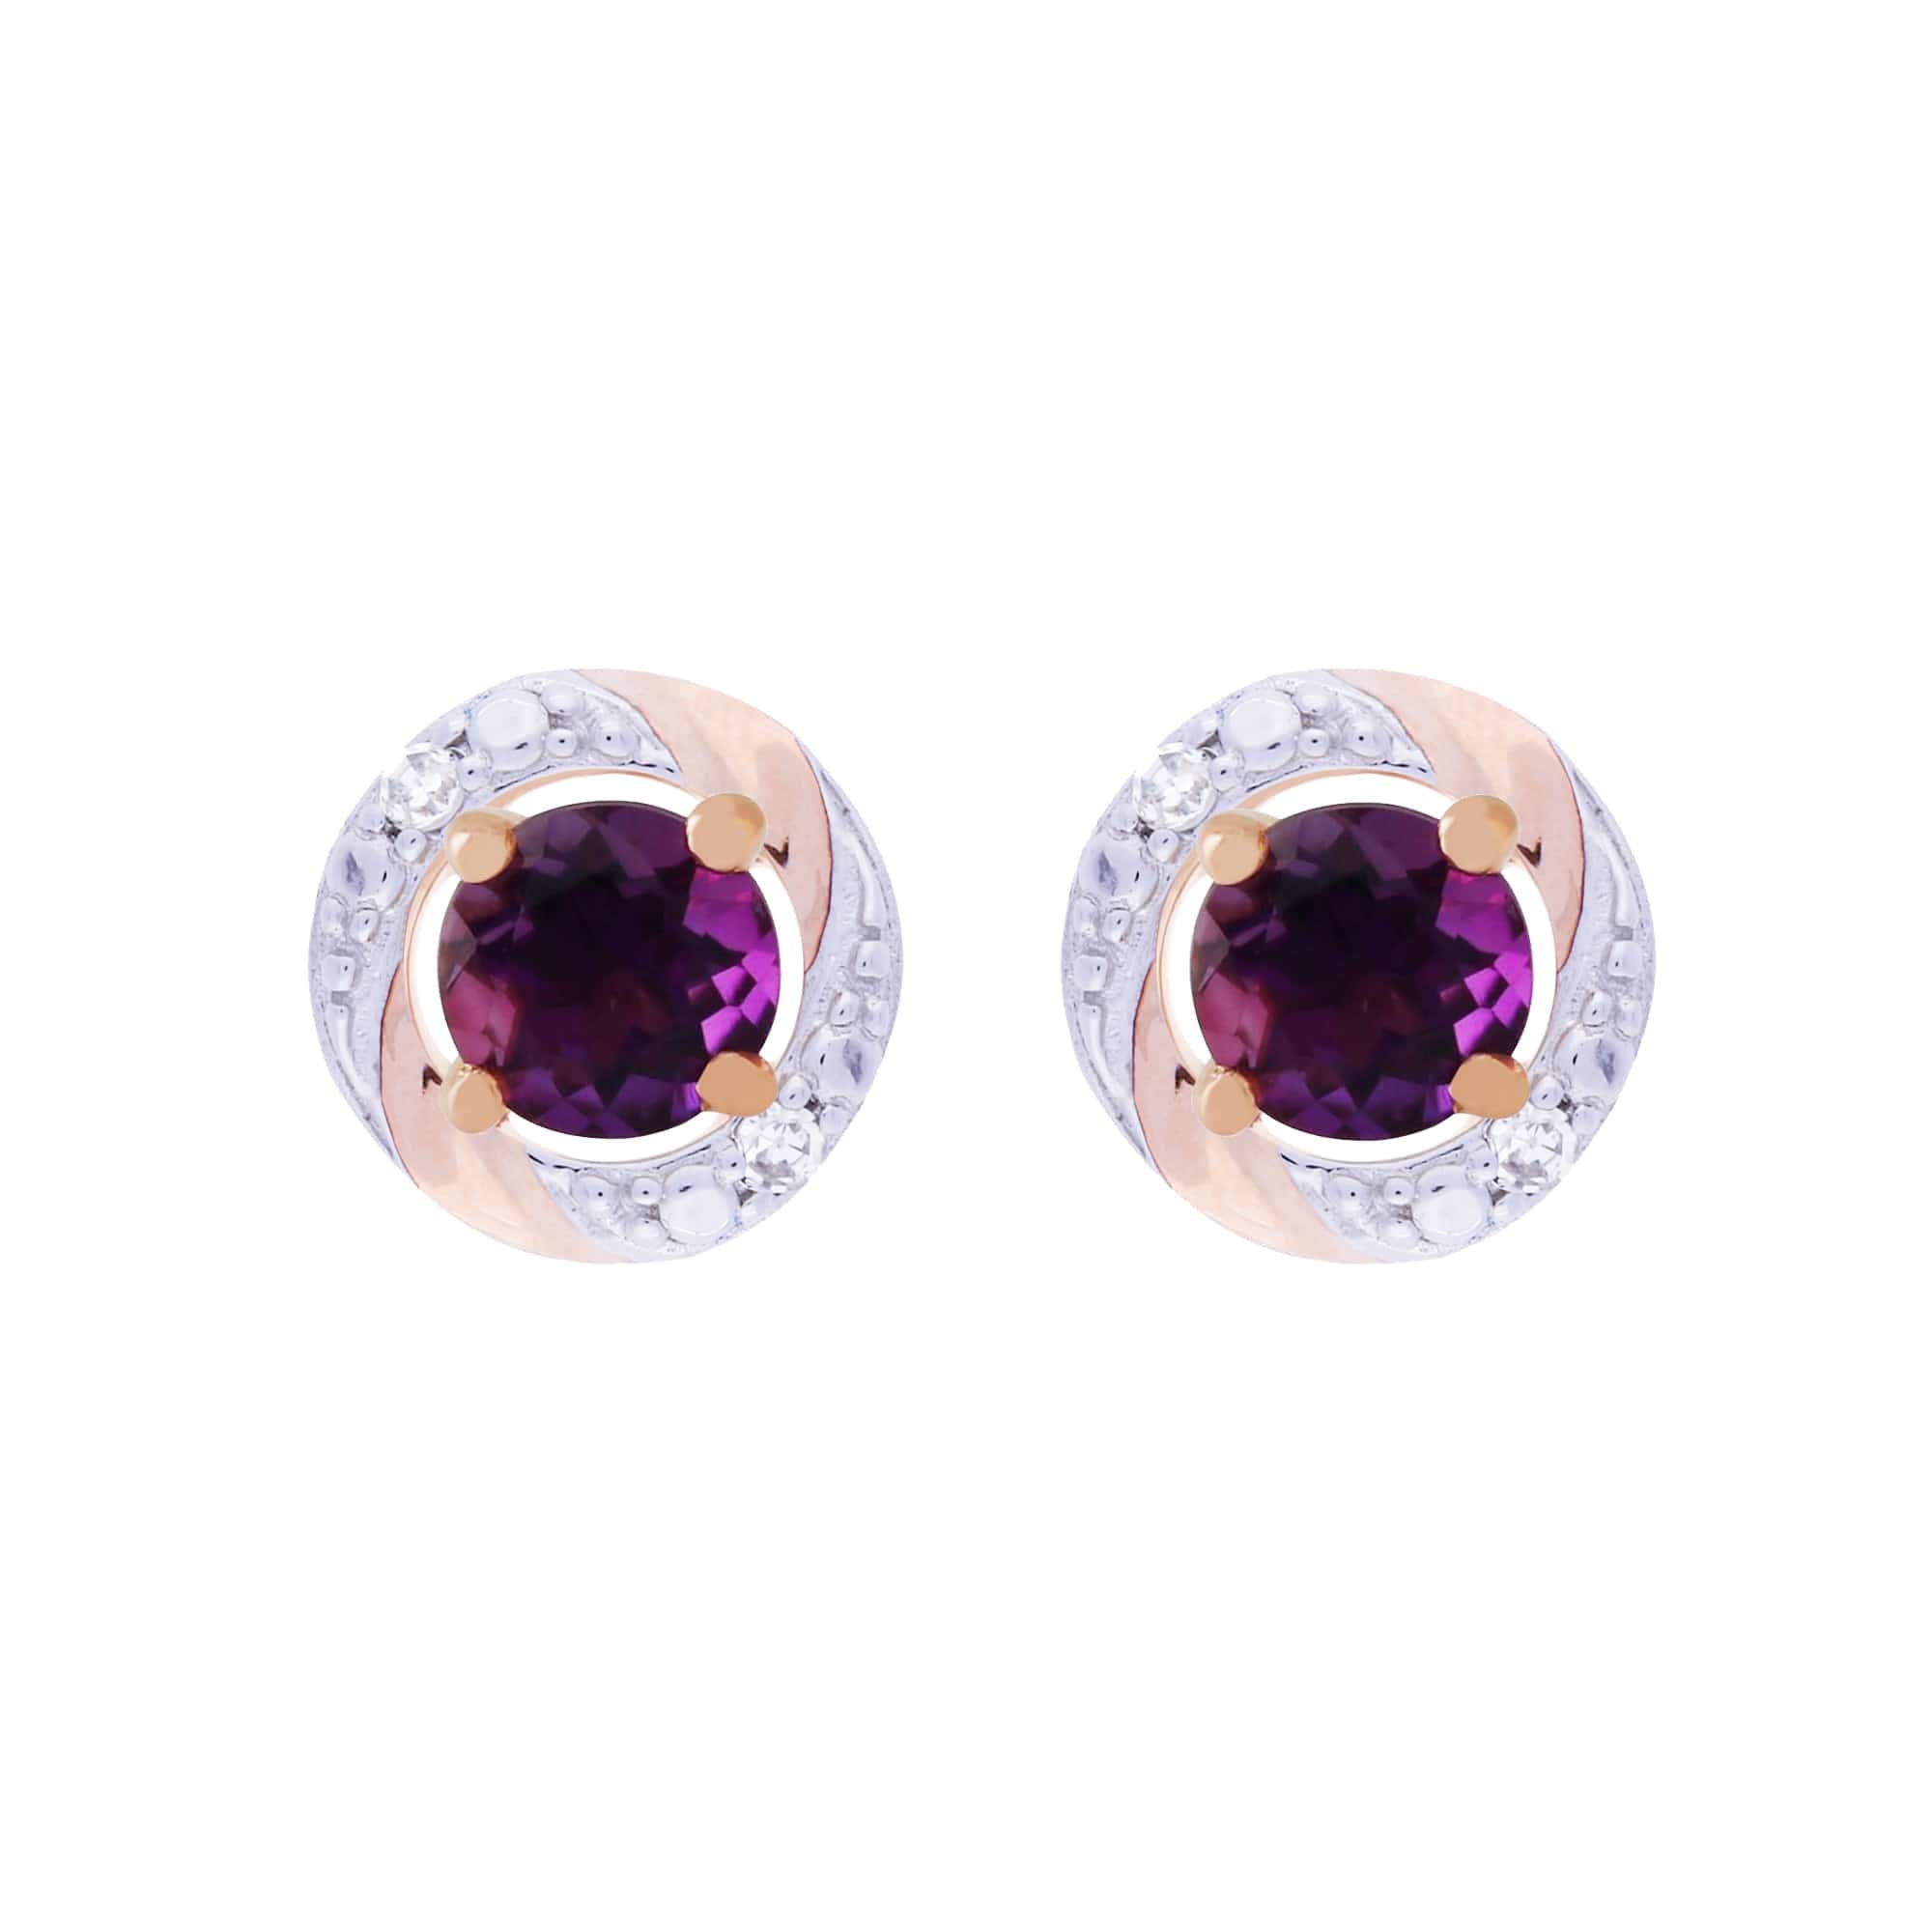 Classic Round Amethyst Stud Earrings with Detachable Diamond Round Earrings Jacket Set in 9ct Rose Gold - Gemondo